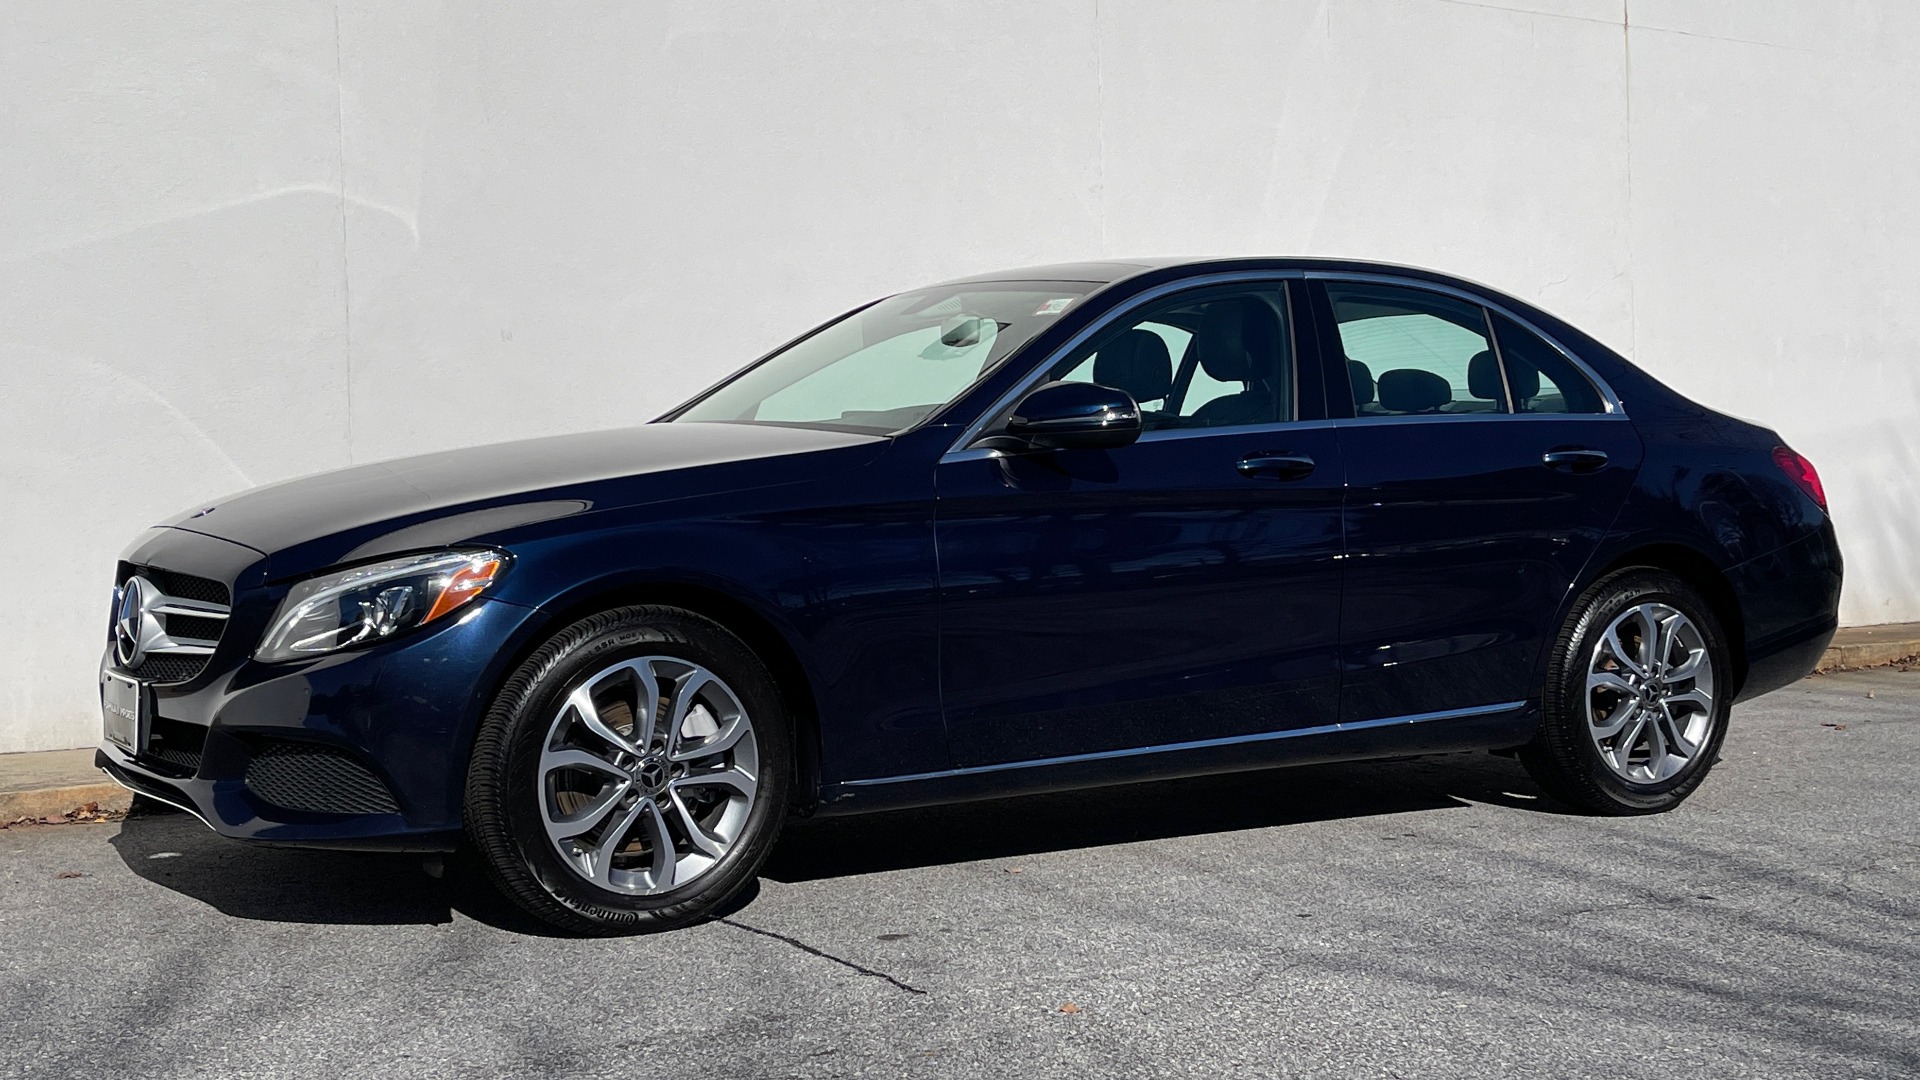 Used 2018 Mercedes-Benz C-CLASS C 300 4MATIC PREMIUM / APPLE / PANO-ROOF / REARVIEW for sale $35,795 at Formula Imports in Charlotte NC 28227 2